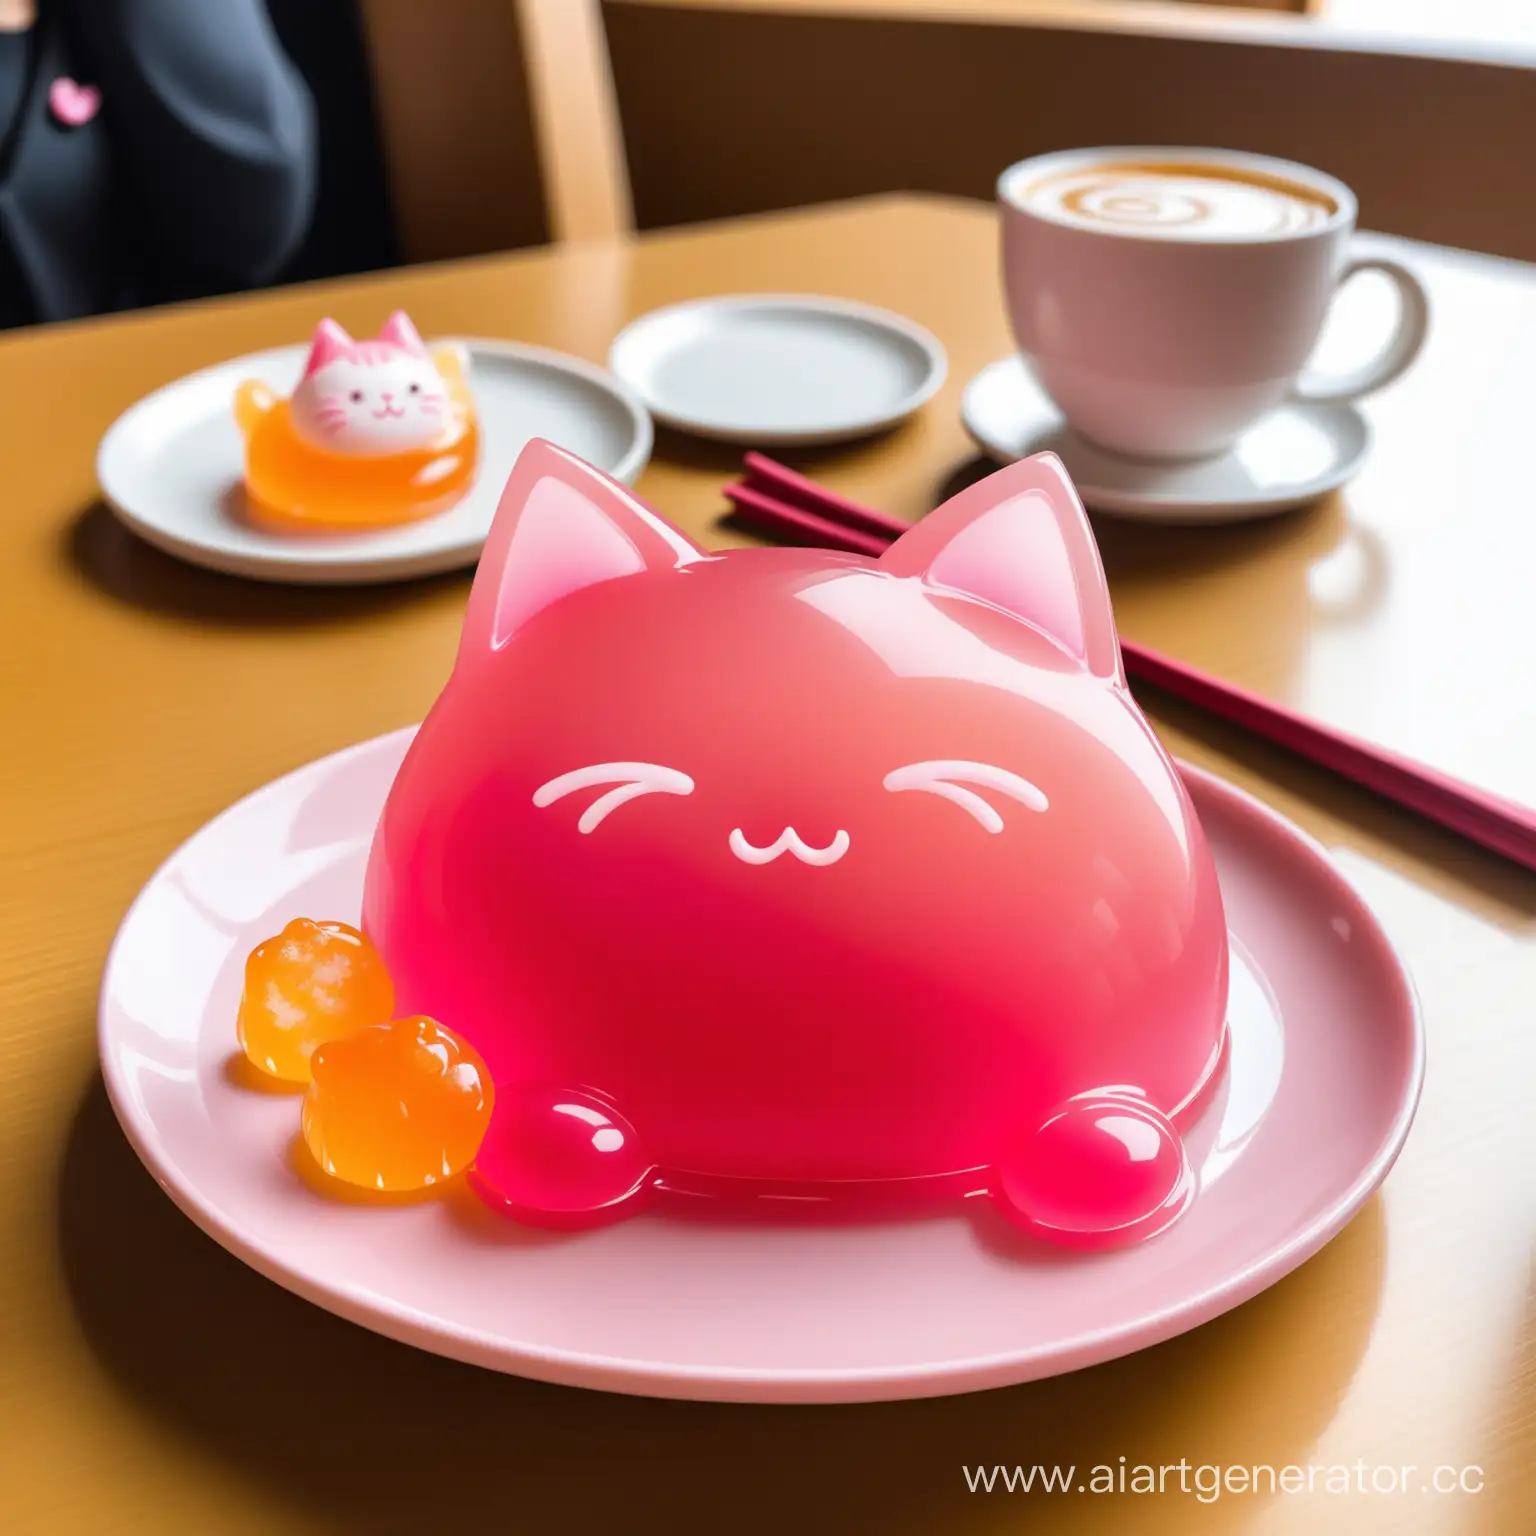 Japanesestyle-Caf-Table-with-Pink-KittenShaped-Jelly